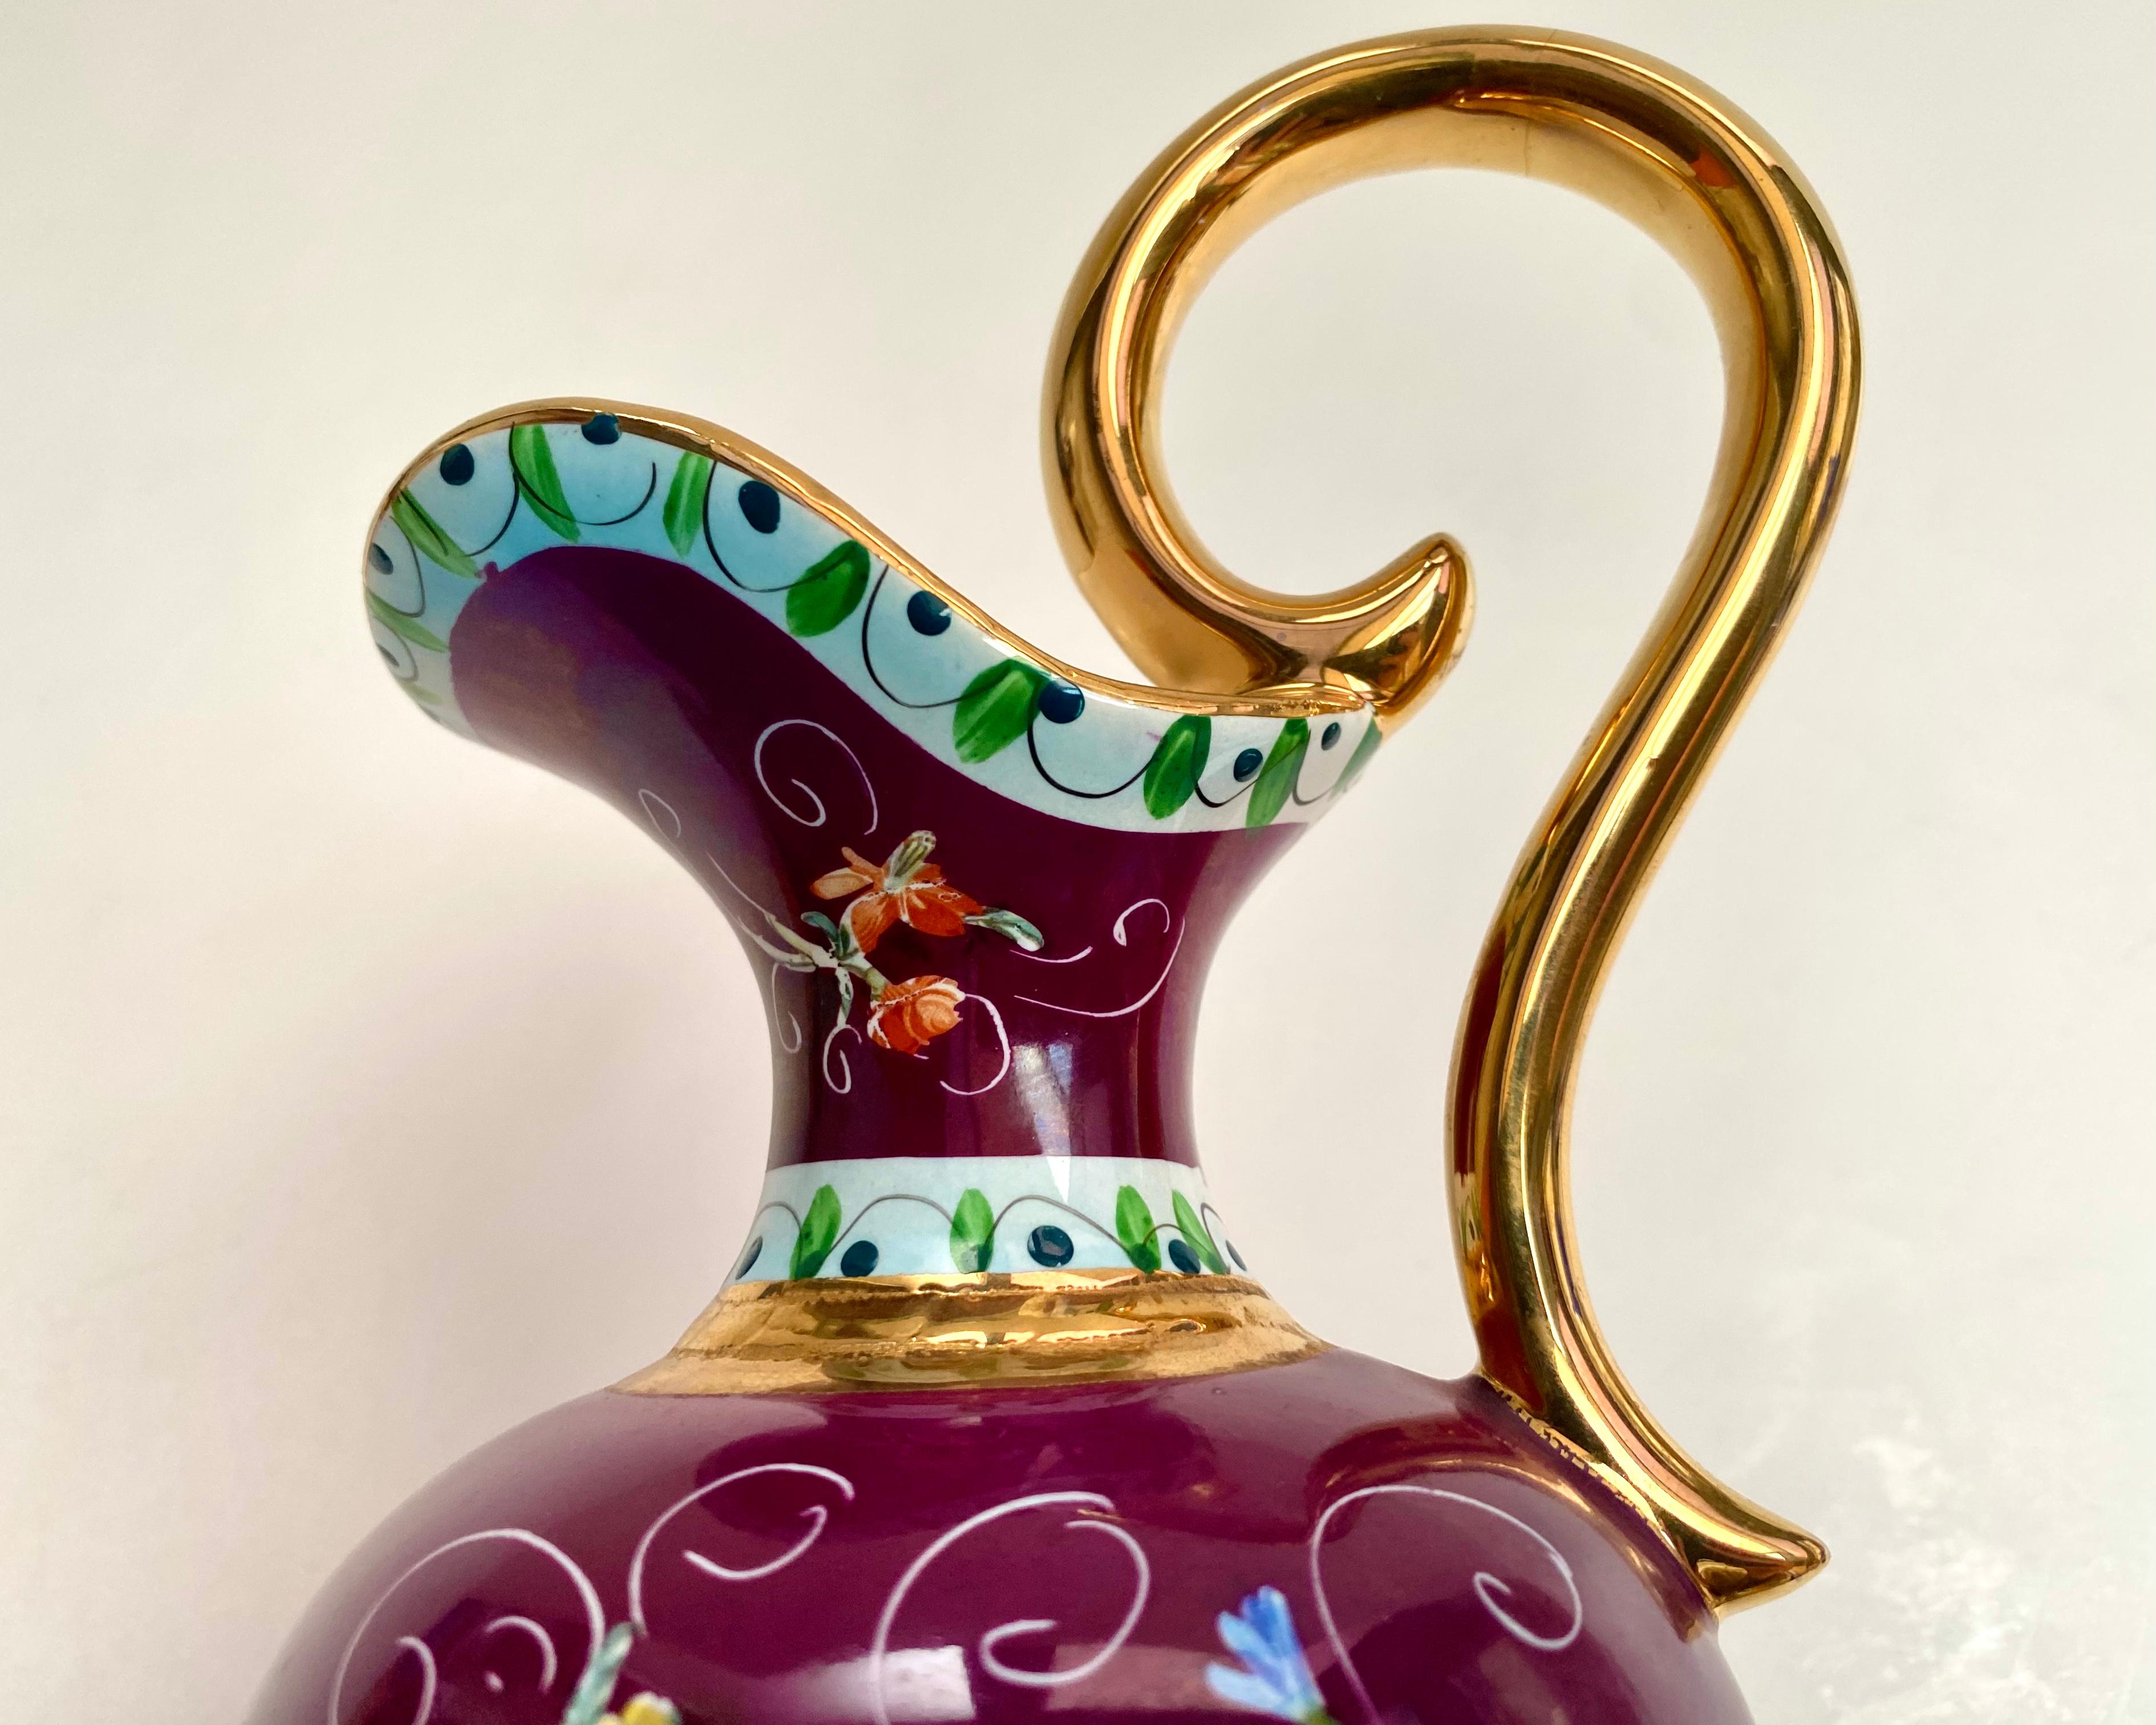 Gorgeous Hubert Bequet ceramic pitcher vase with a beautifull burgundy background decorated with a bright colorful raised enamel pattern of a colorful flowers.

Belgium, 1970s

All hand crafted and hand painted. All accents in gold including the